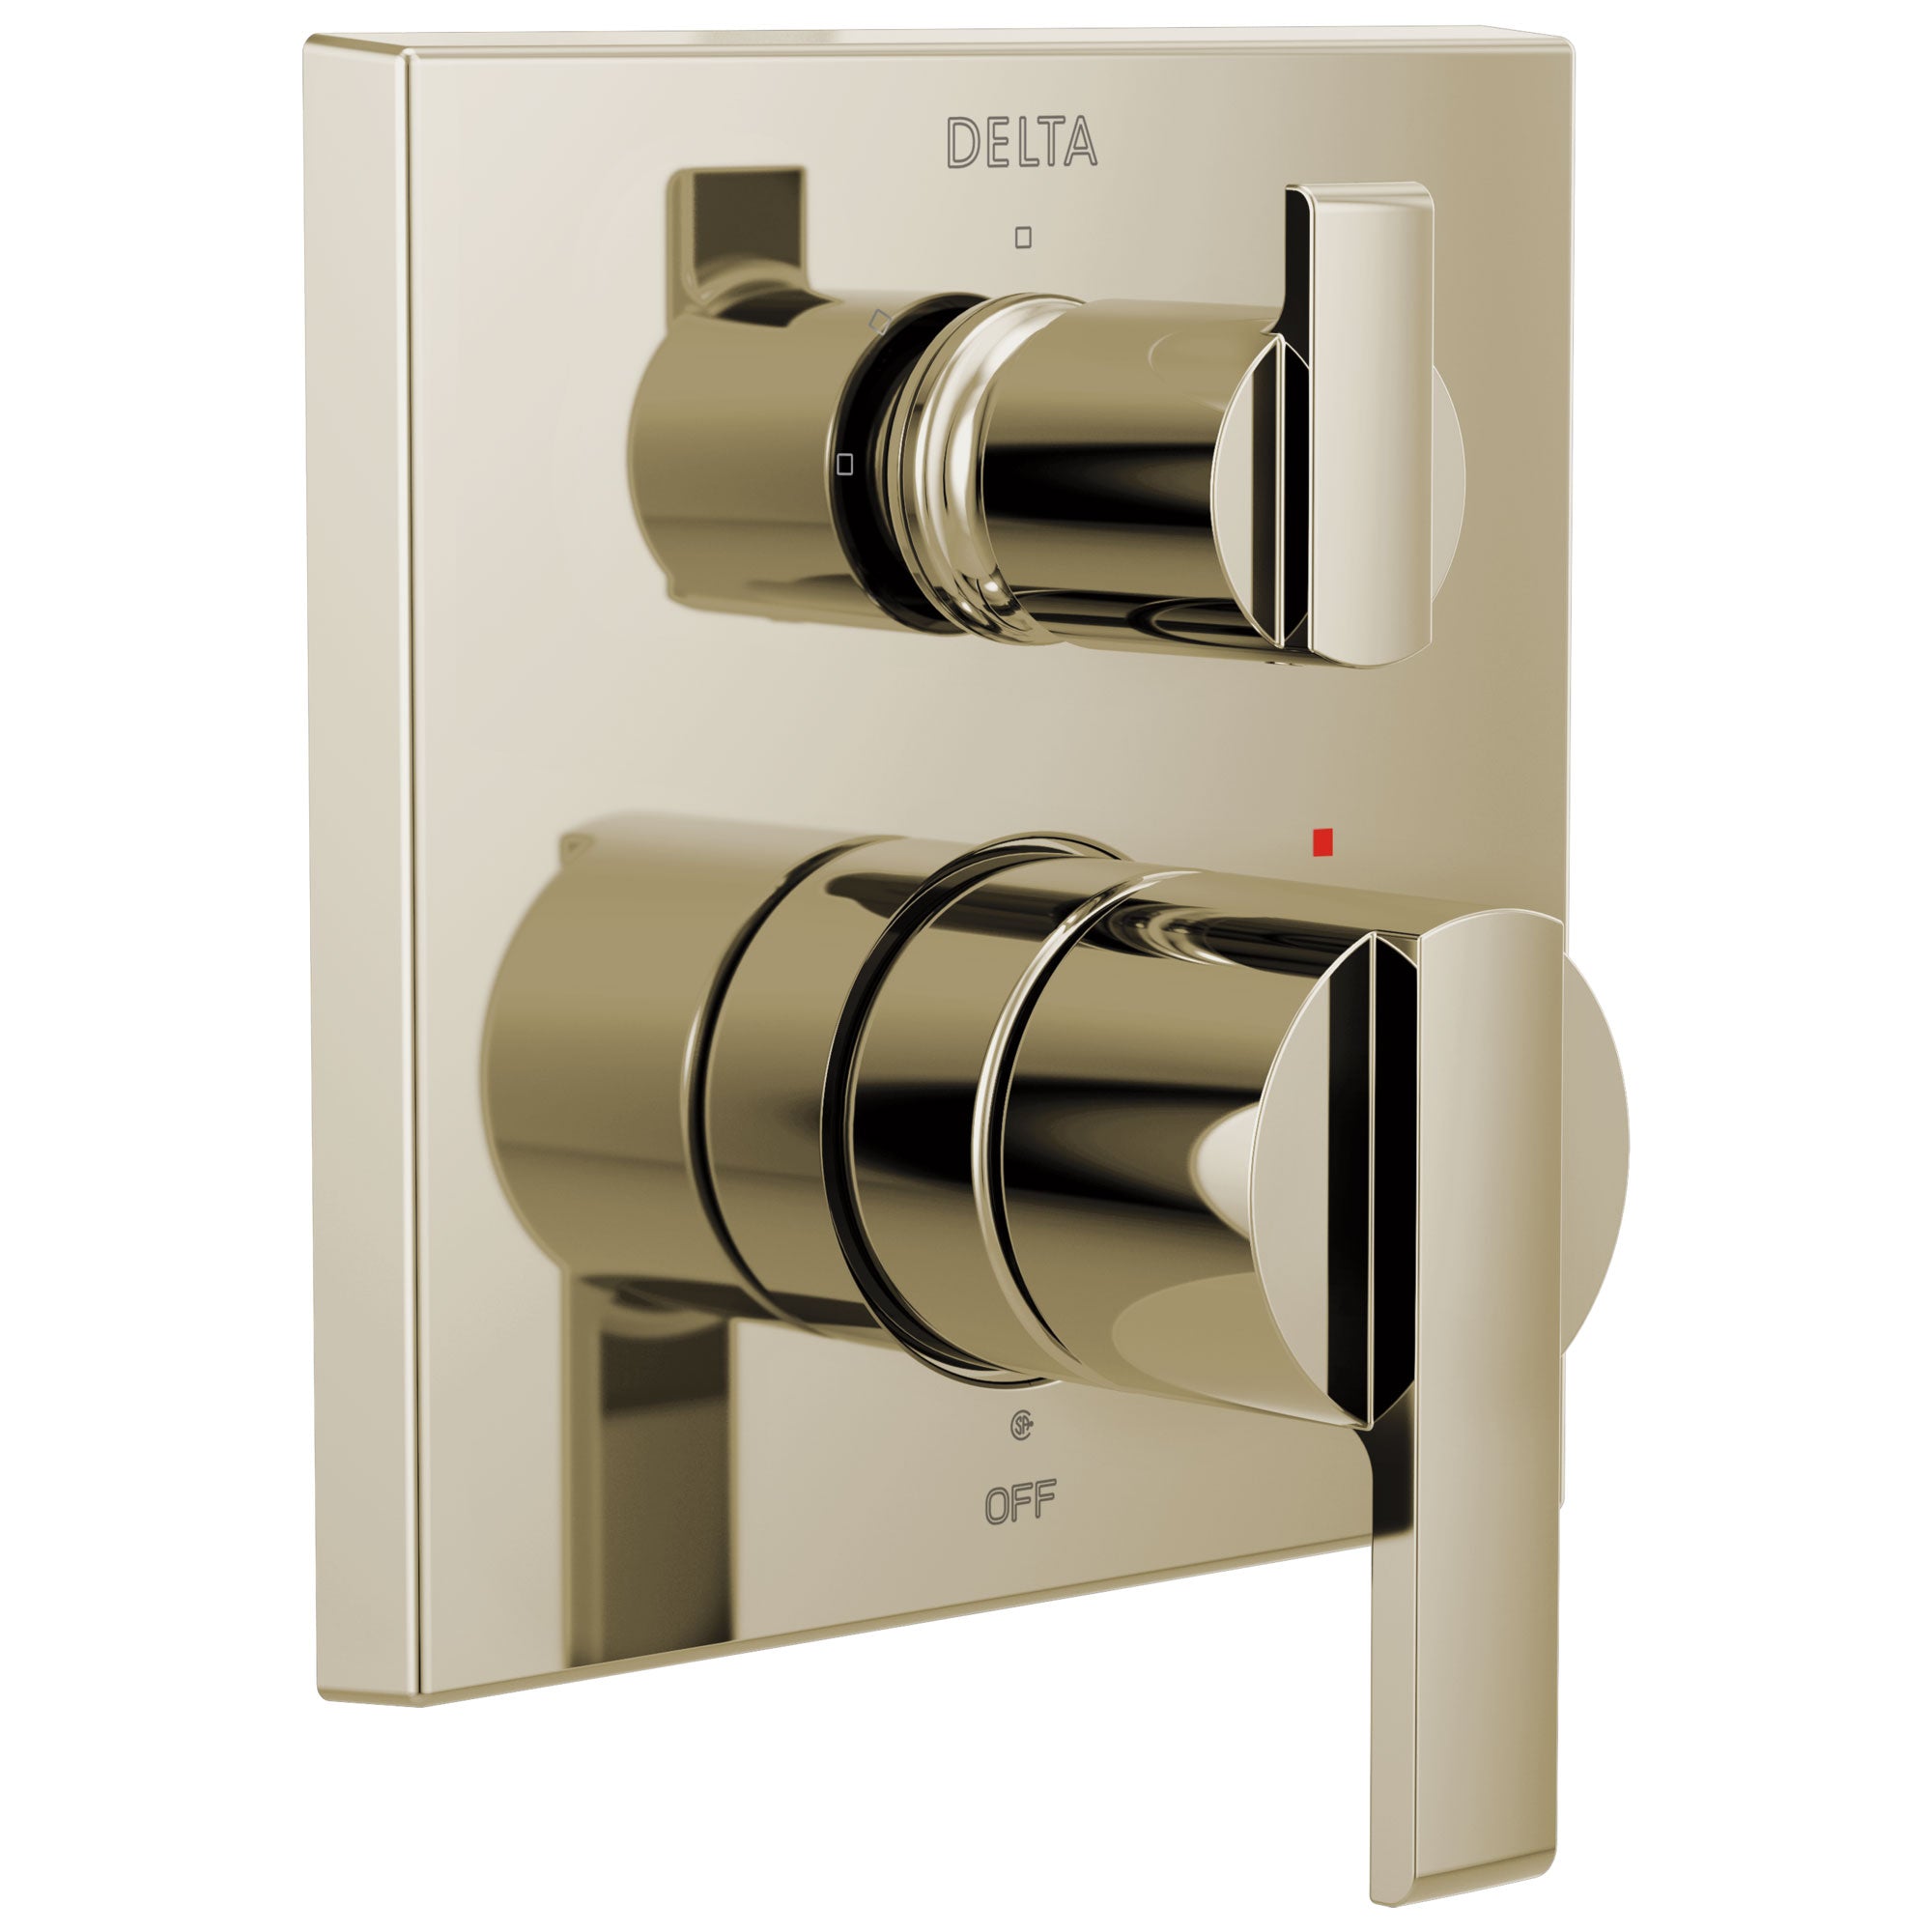 Delta Ara Polished Nickel Finish Angular Modern 14 Series Shower System Control with 3-Setting Integrated Diverter Includes Valve and Handles D3204V